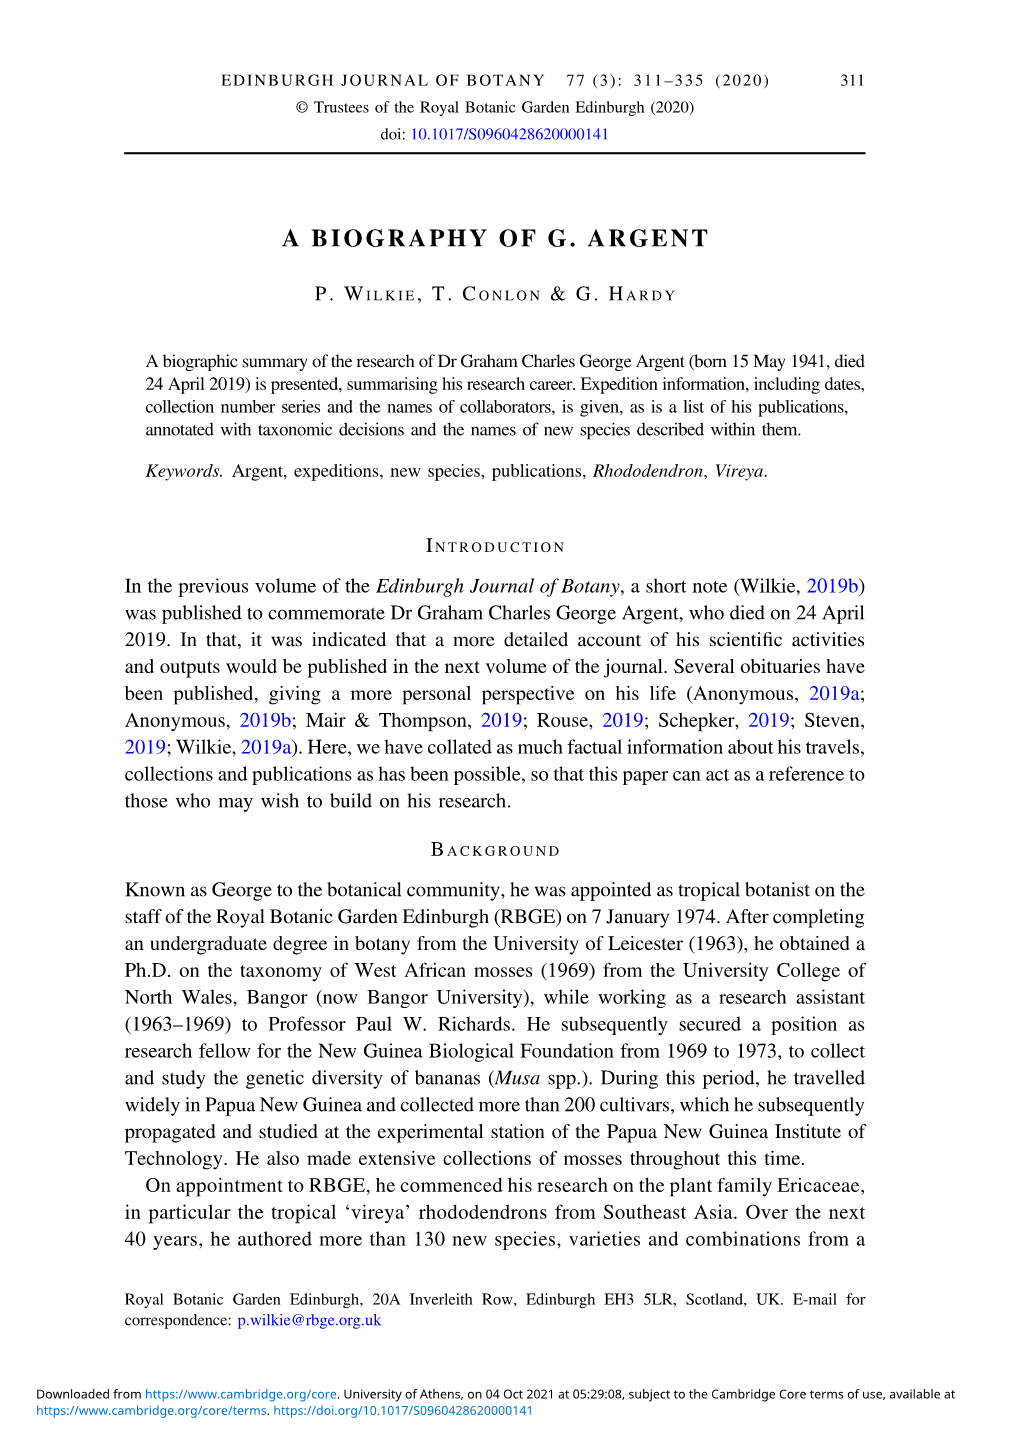 A Biography of G. Argent